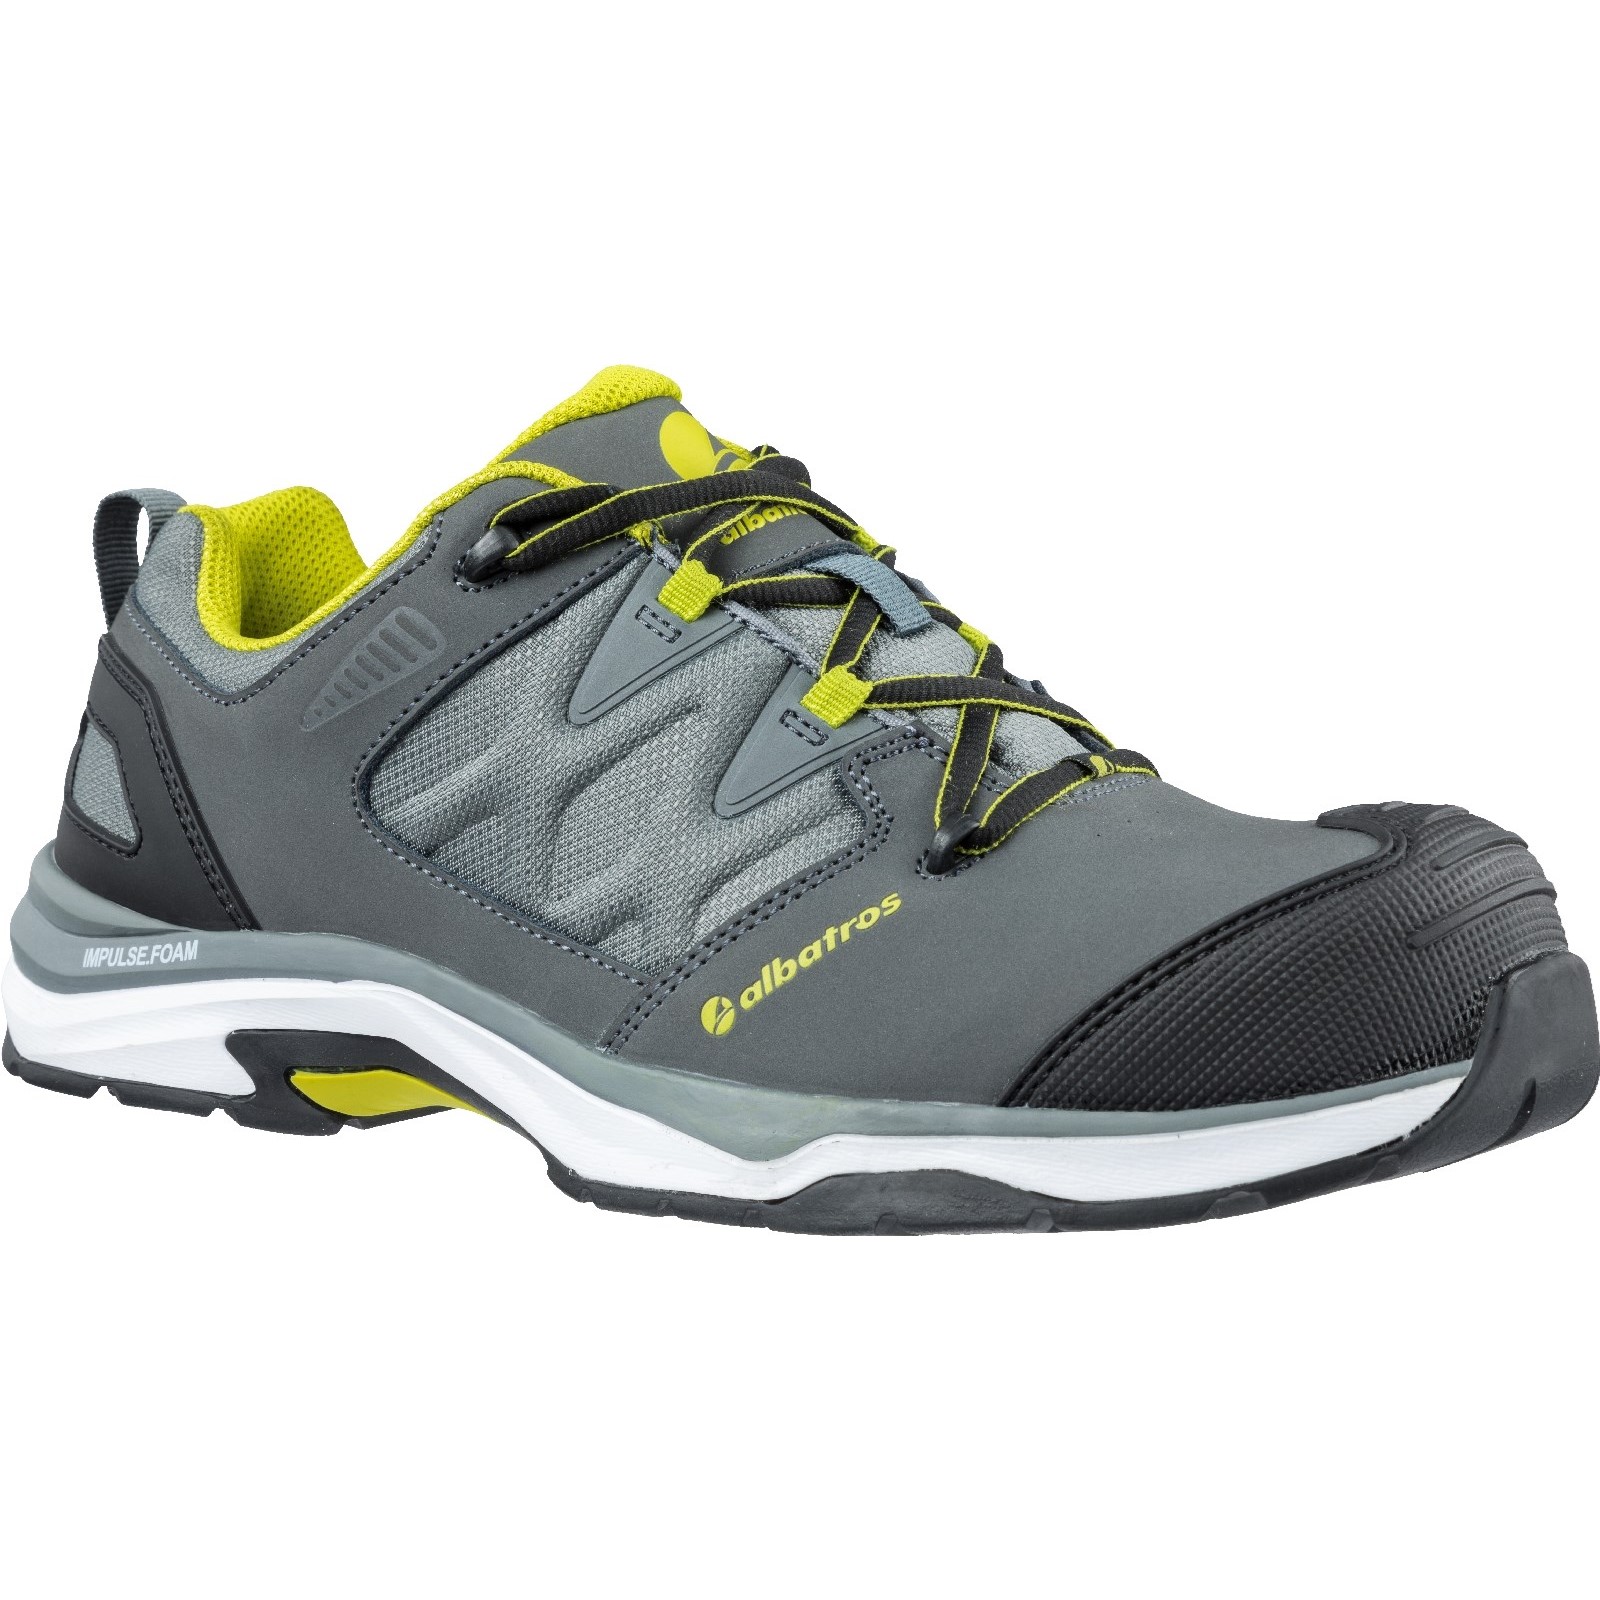 Ultratrail Low Lace Up Safety Shoe